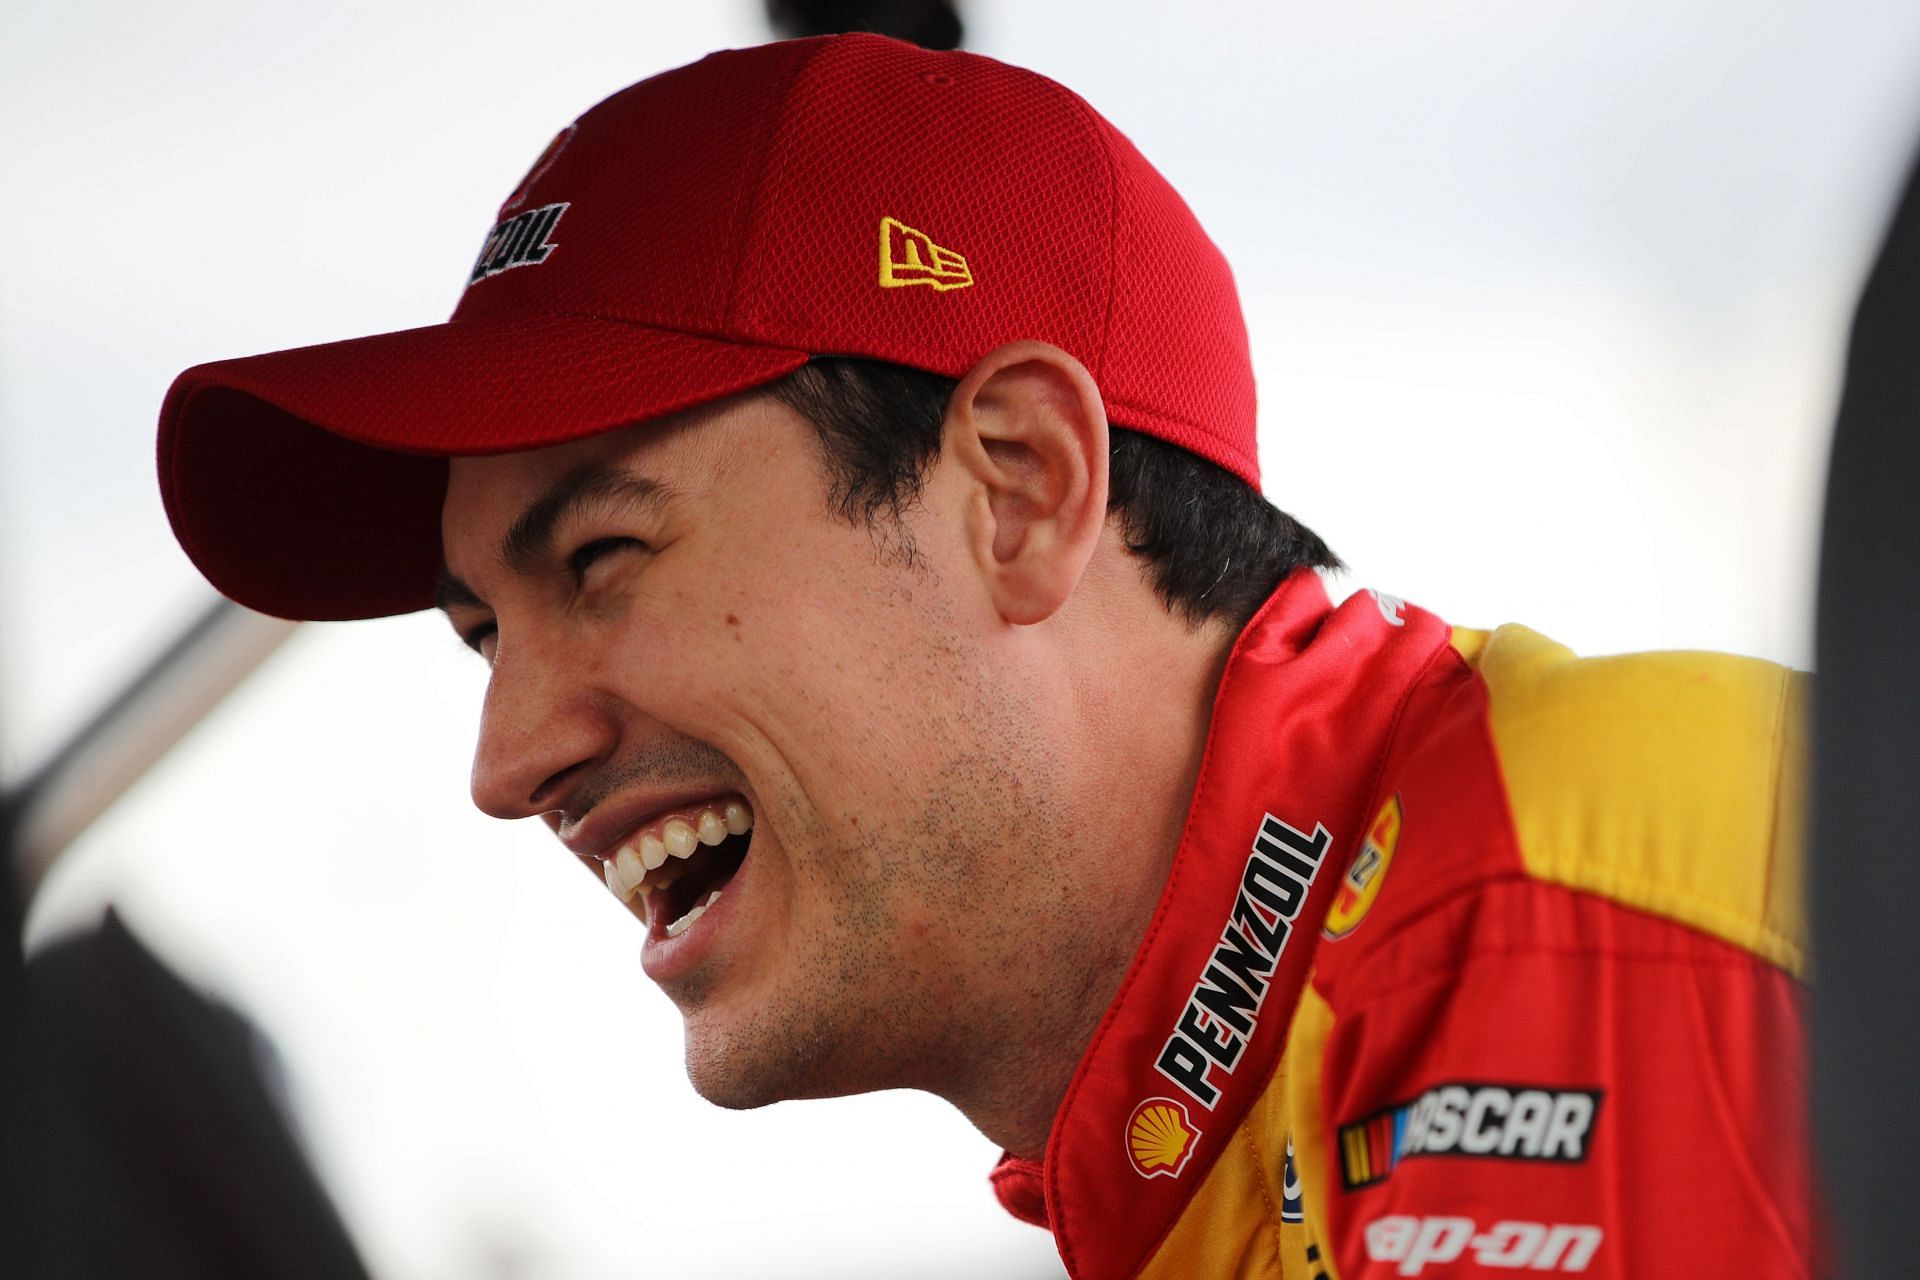 Joey Logano laughs on the grid during practice for the NASCAR Cup Series Blue-Emu Maximum Pain Relief 400 at Martinsville Speedway. (Photo by Meg Oliphant/Getty Images)